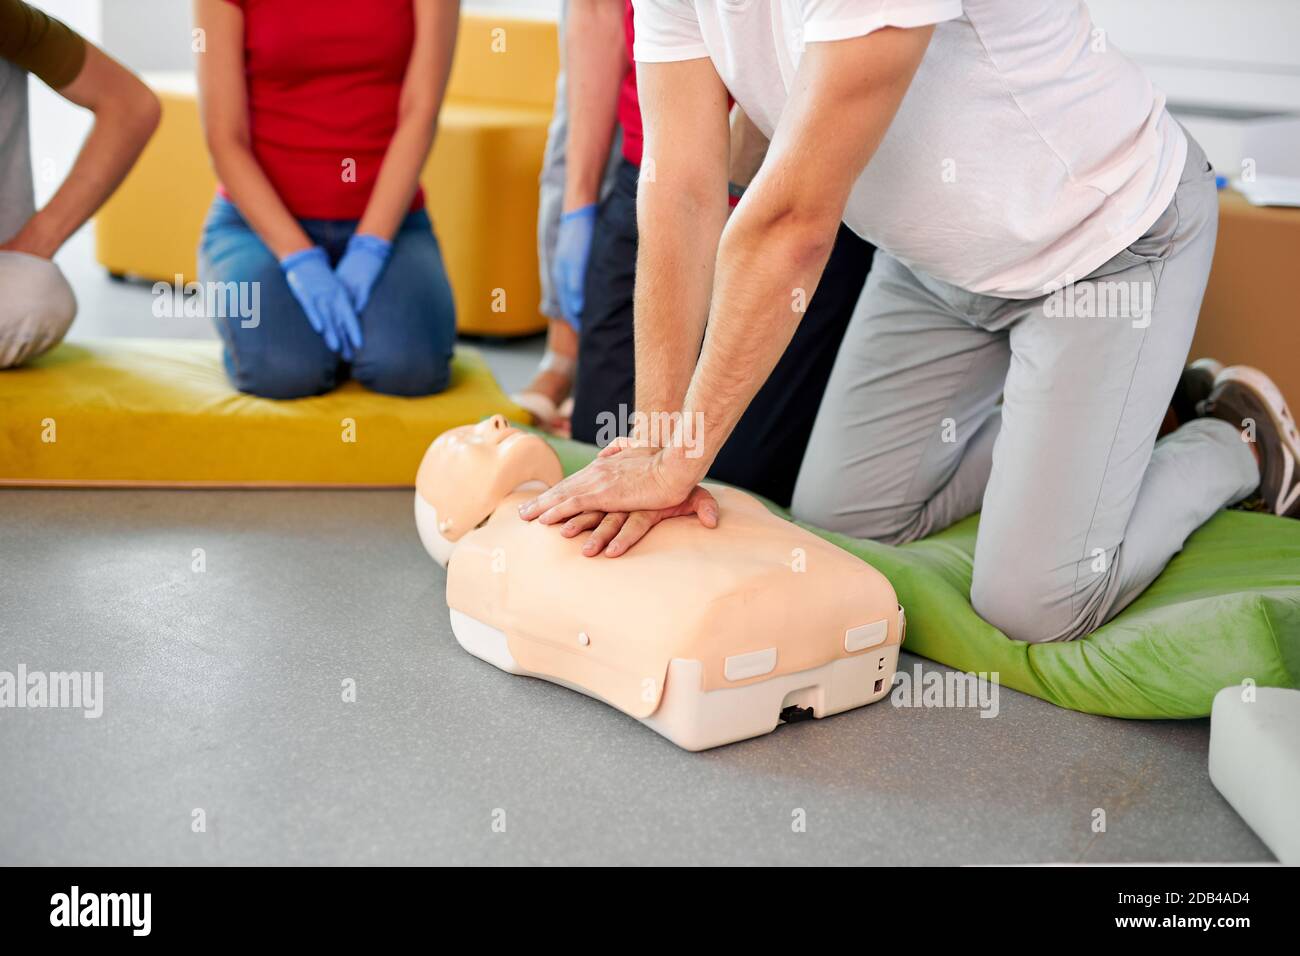 caucasian people practice an exercise of resuscitation during lesson, help injured people, first aid and medicine concept Stock Photo